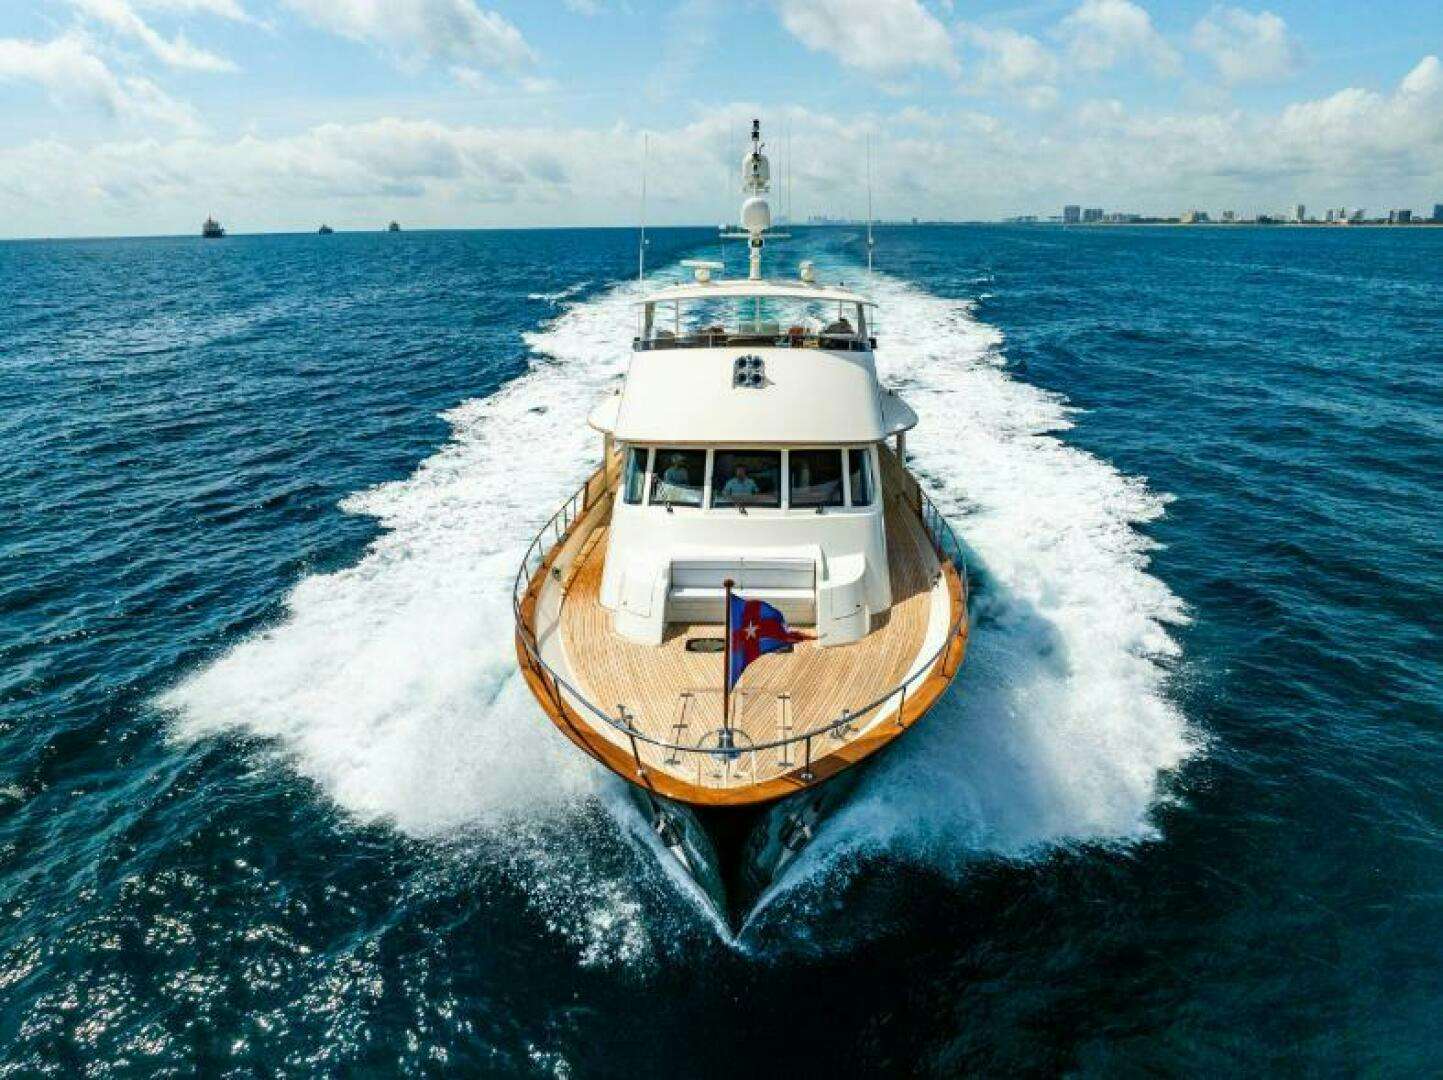 Starlight
Yacht for Sale